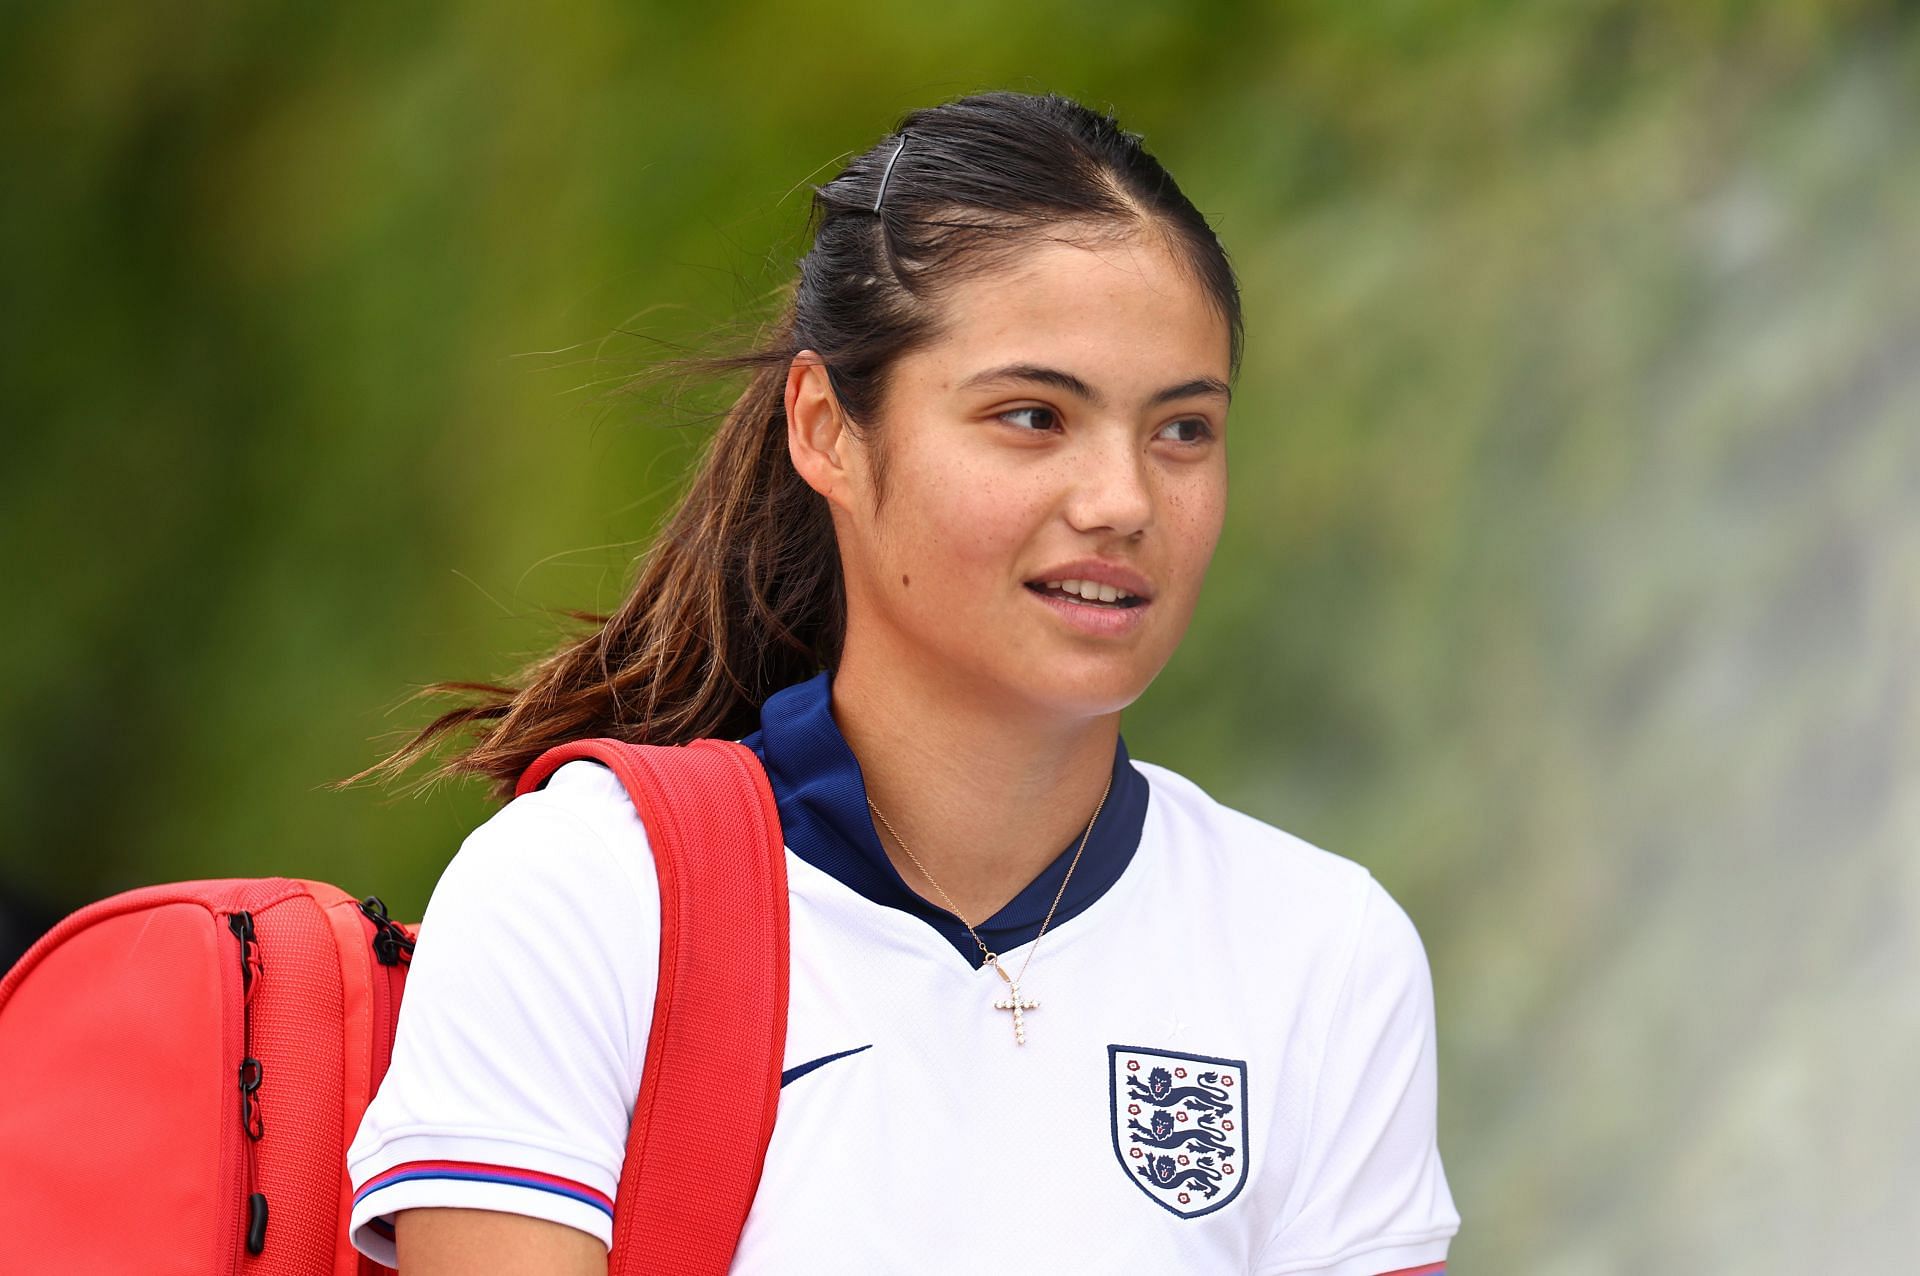 In Pictures: Emma Raducanu gets into the Euro 2024 spirit at Wimbledon, sports England jersey in practice ahead of RO16 clash against Slovakia